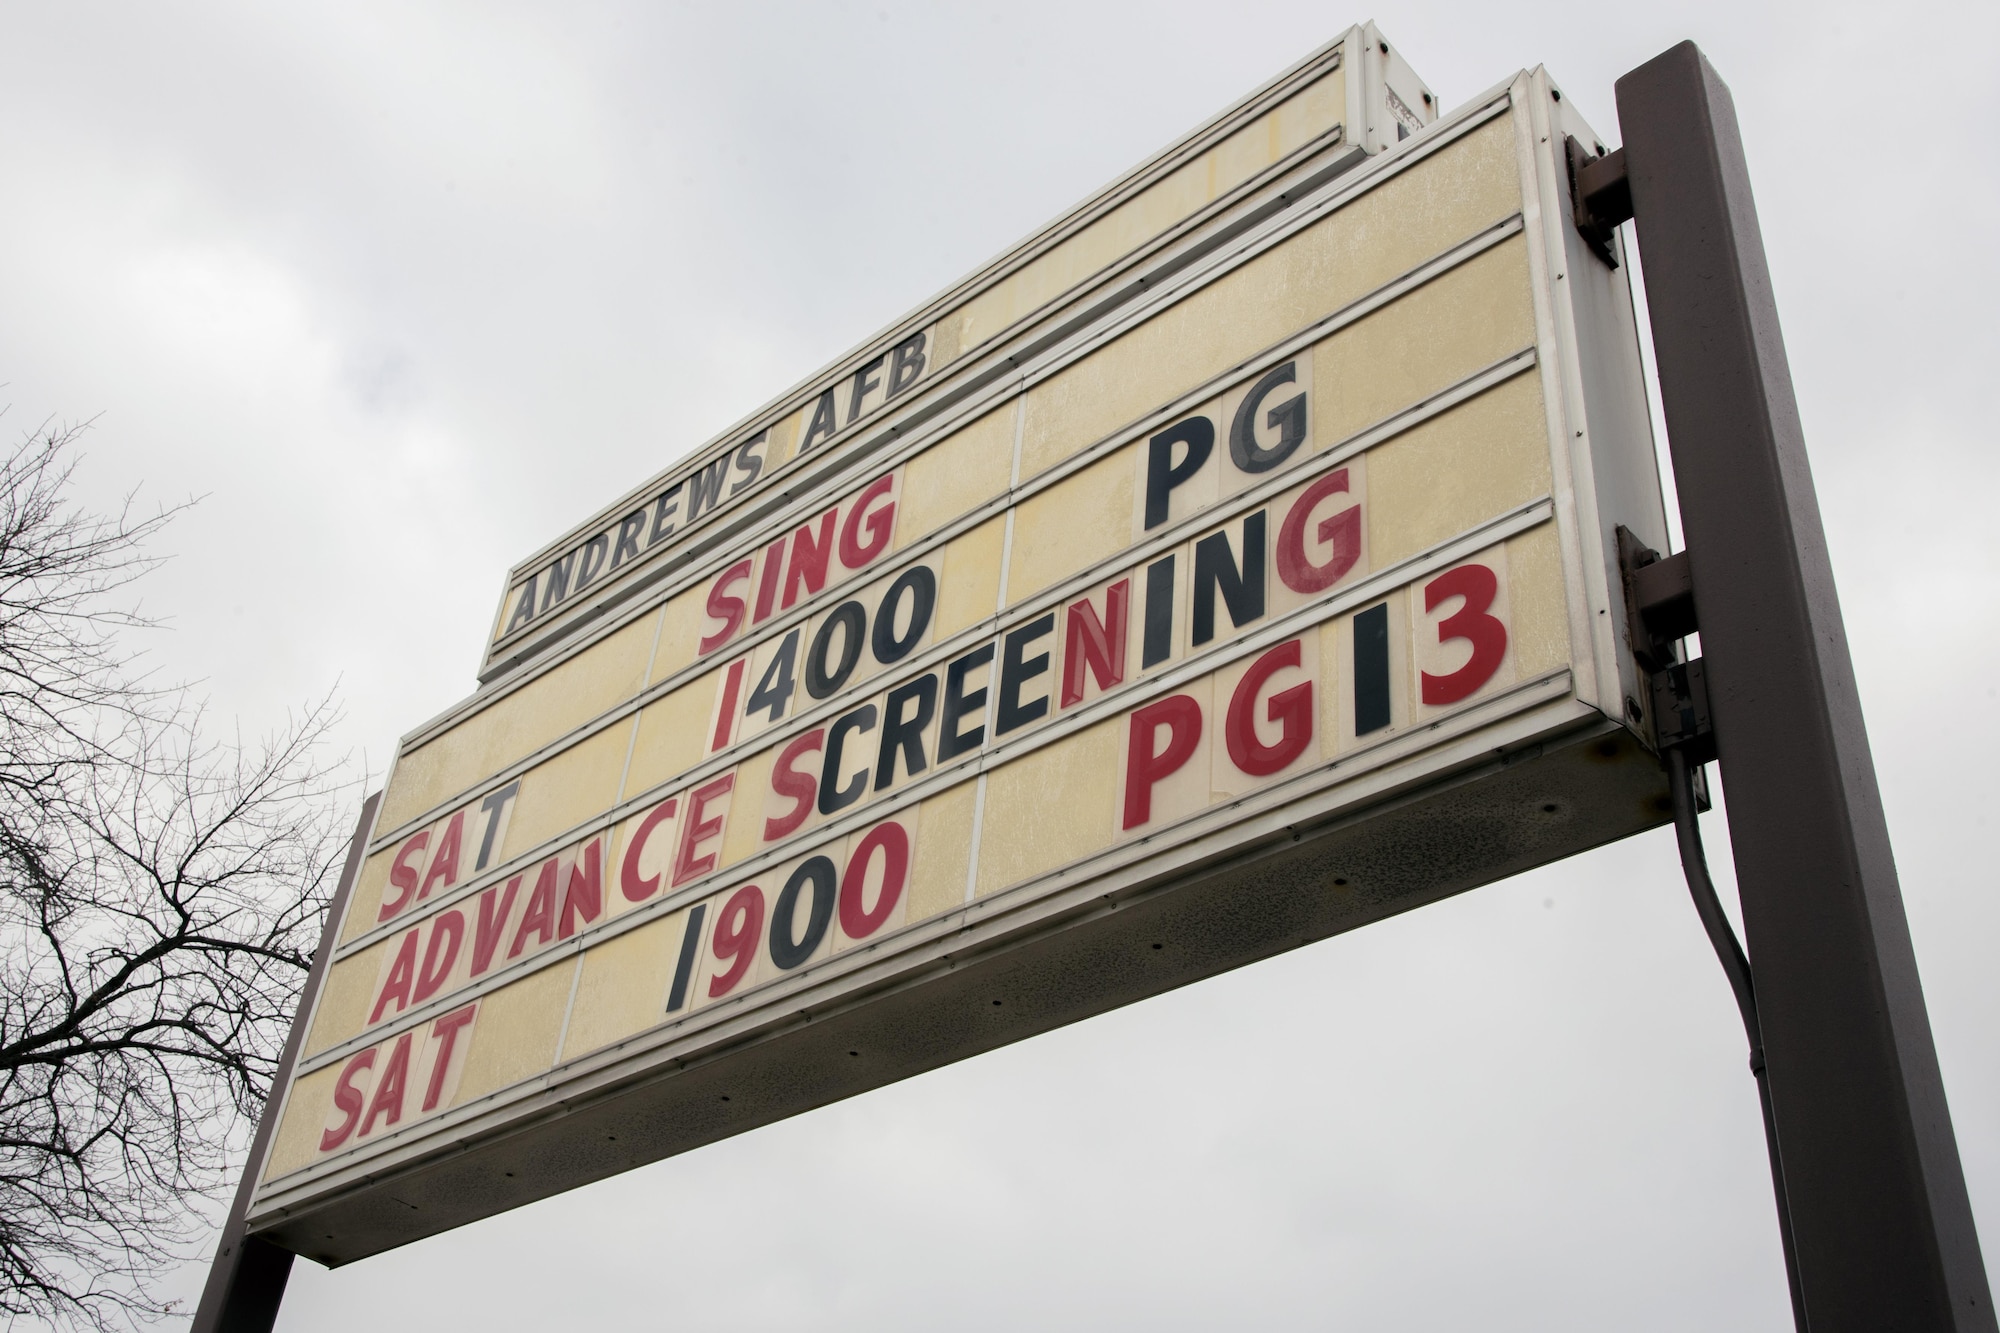 A base theater sign stands outside at Joint Base Andrews, Md., March 3, 2017. A free movie screening of “Kong: Skull Island” for Department of Defense cardholders is scheduled during the base theater grand opening, March 4, 2017, at 7 p.m. (U.S. Air Force photo by Airman 1st Class Valentina Lopez)